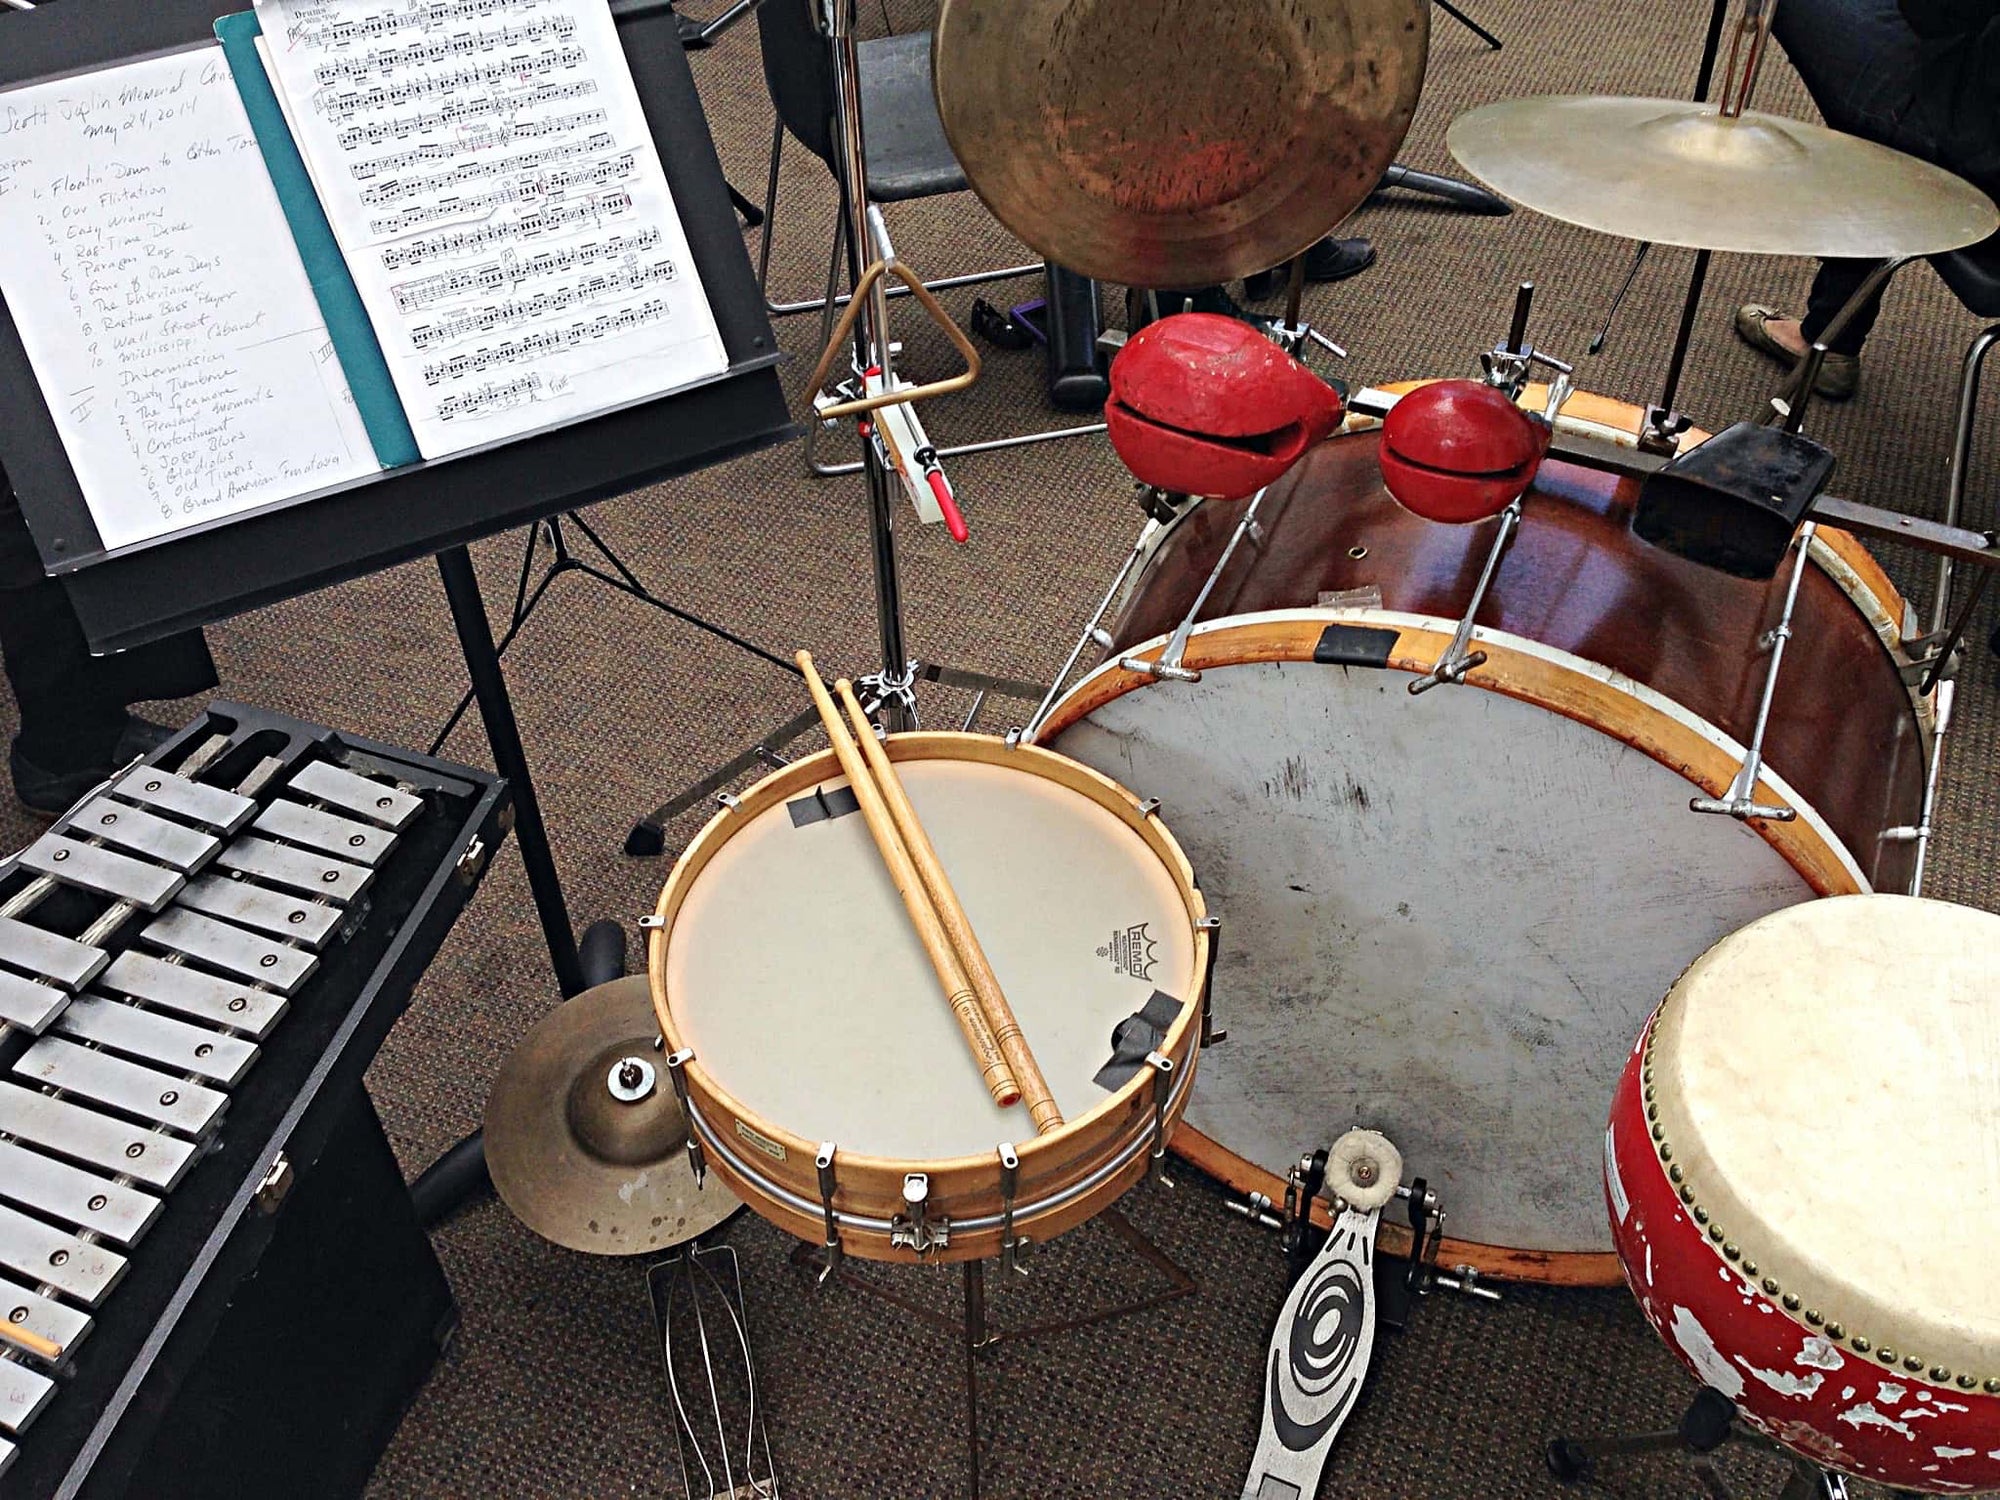 A few of Taylor Goodson's setups from his performances with the Paragon Ragtime Orchestra.